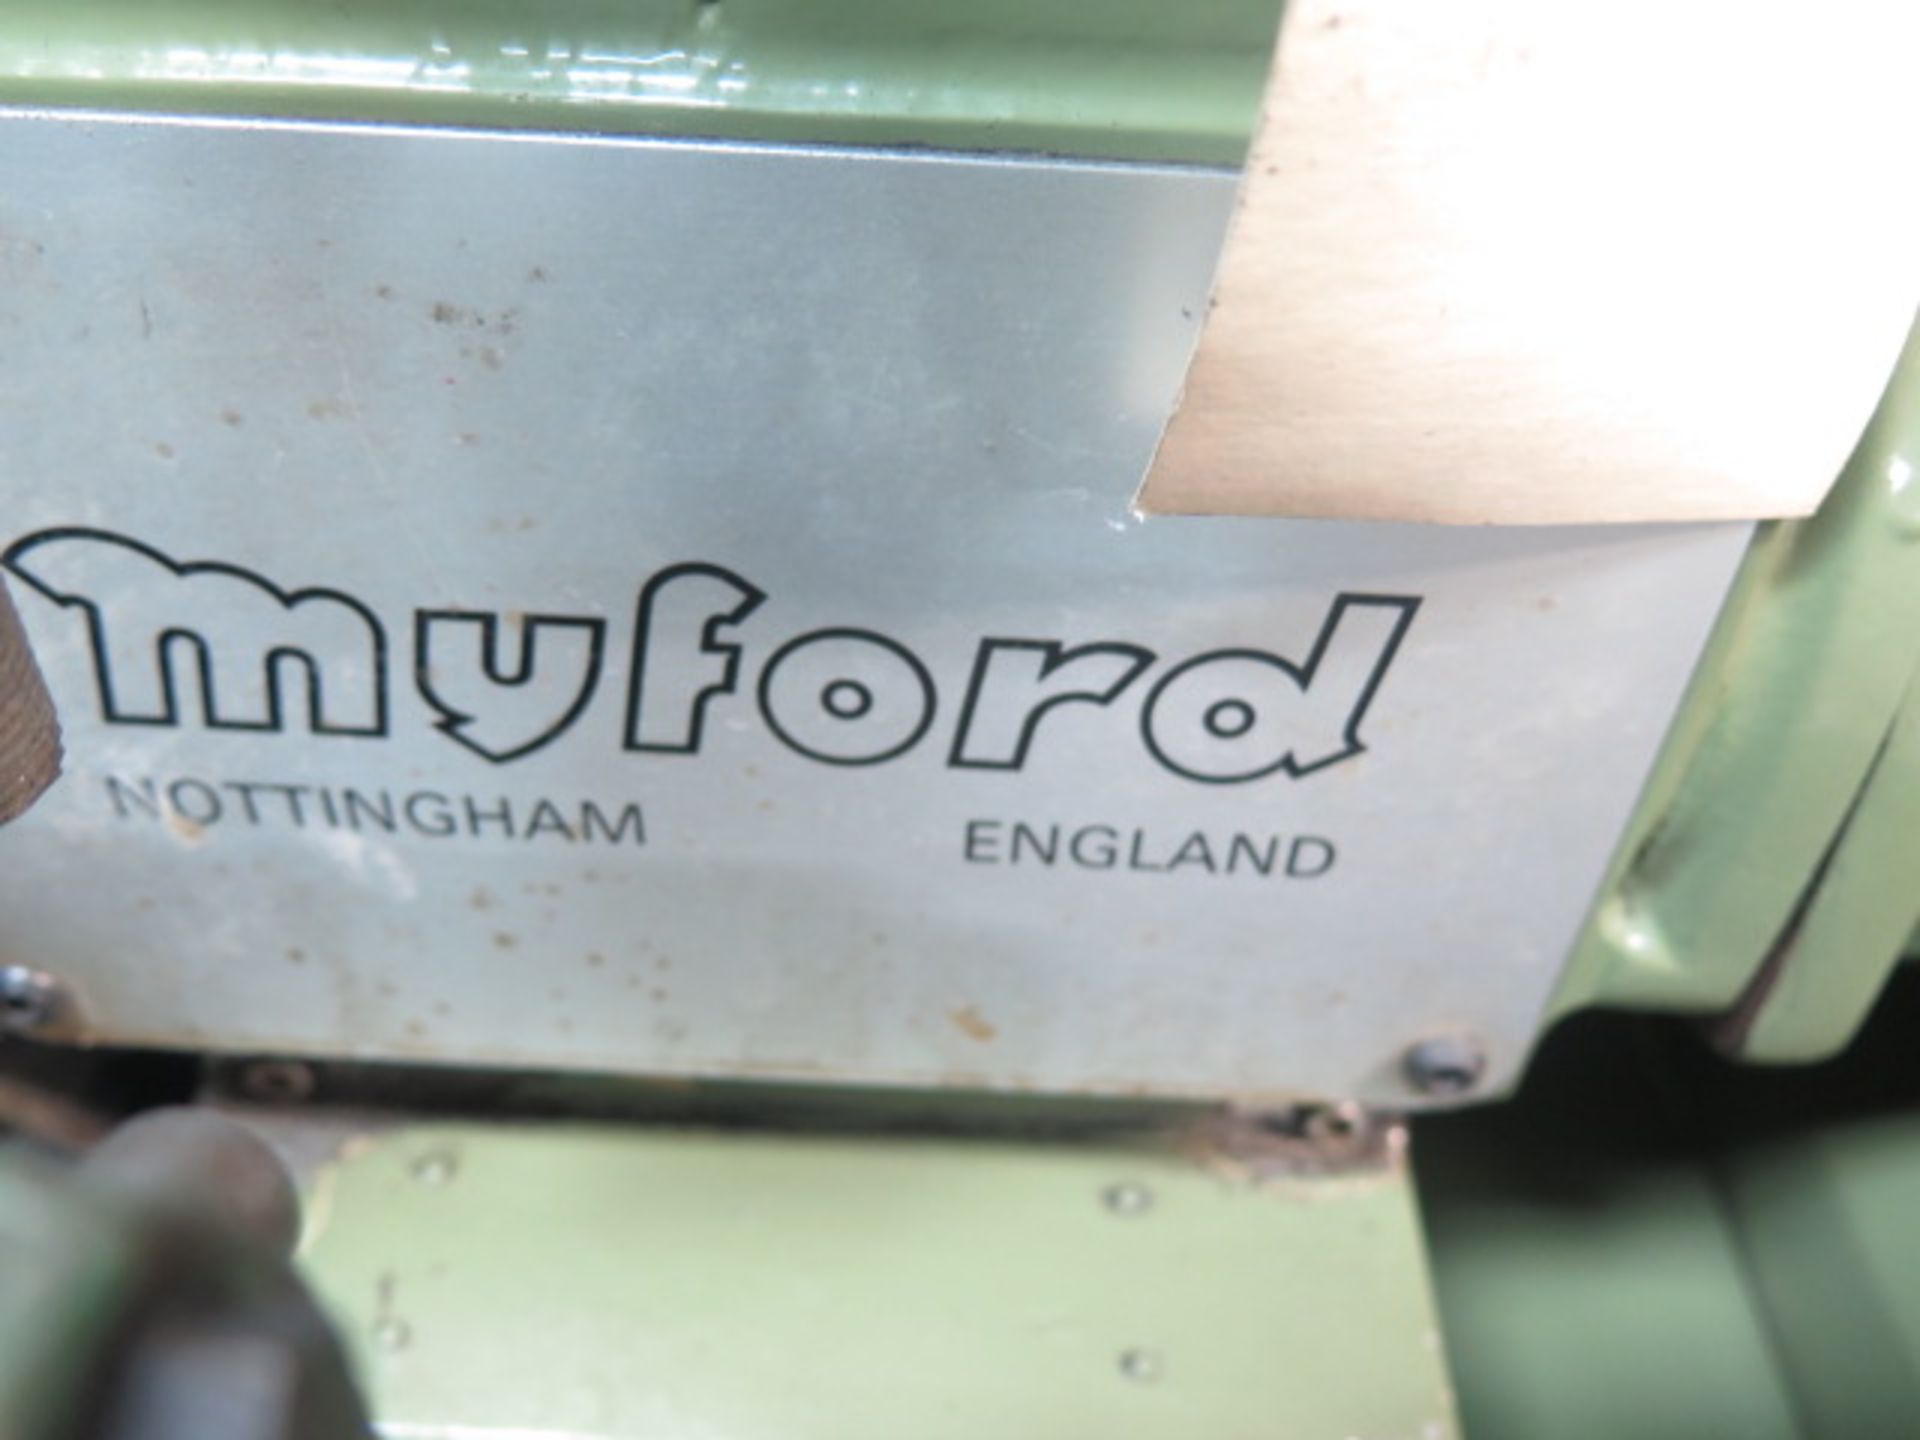 Myford MG12-M 5” x 12” Universal Cylindrical Grinder s/n SM157324 w/ Motorized Work Head, Tailstock, - Image 9 of 9